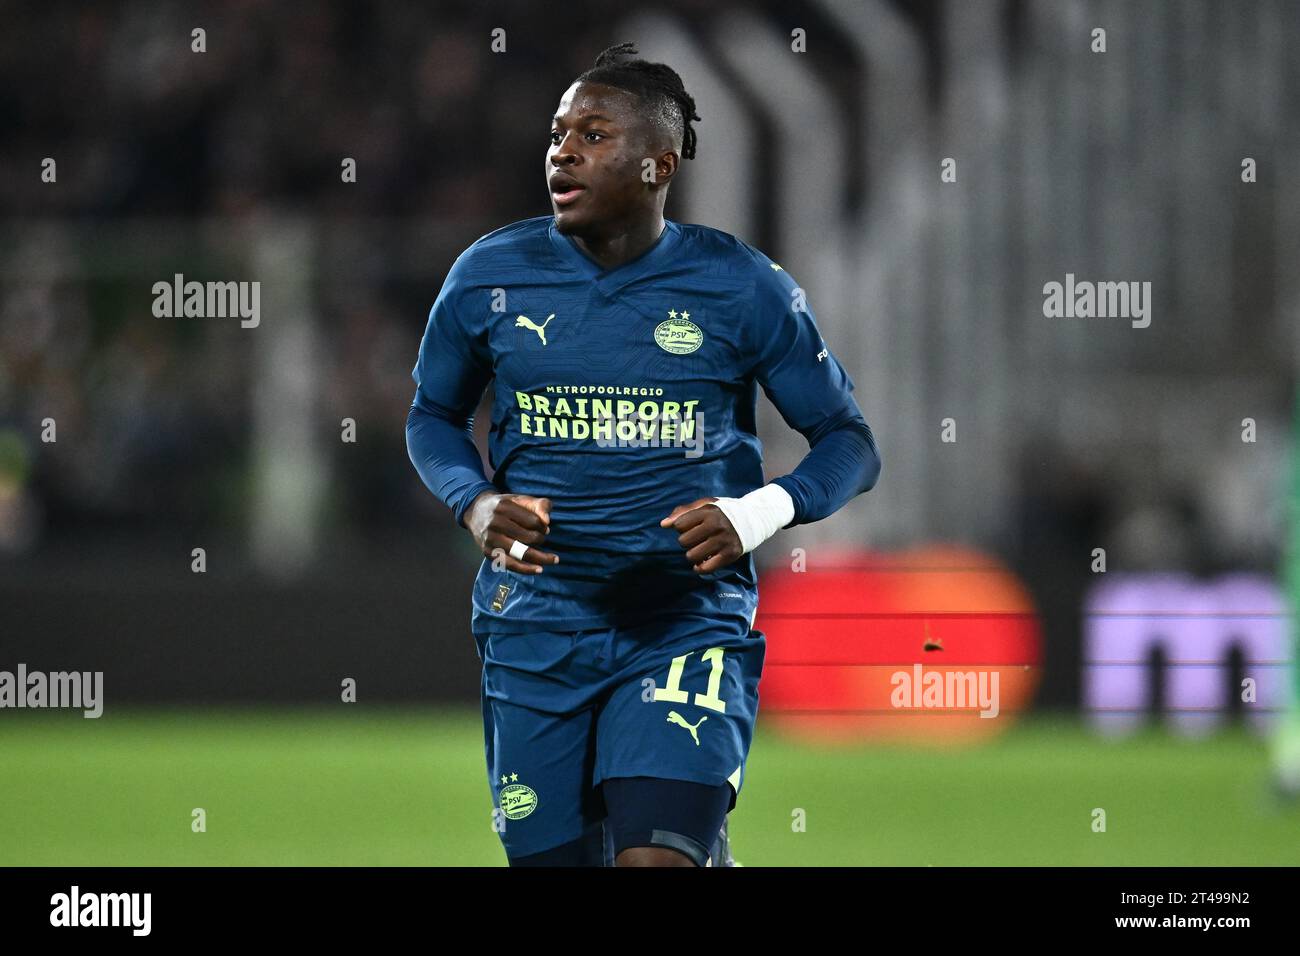 LENS, FRANCE - OCTOBER 24: Johan Bakayoko of PSV Eindhoven during the UEFA Champions League match between RC Lens and PSV Eindhoven at Stade Bollaert- Stock Photo